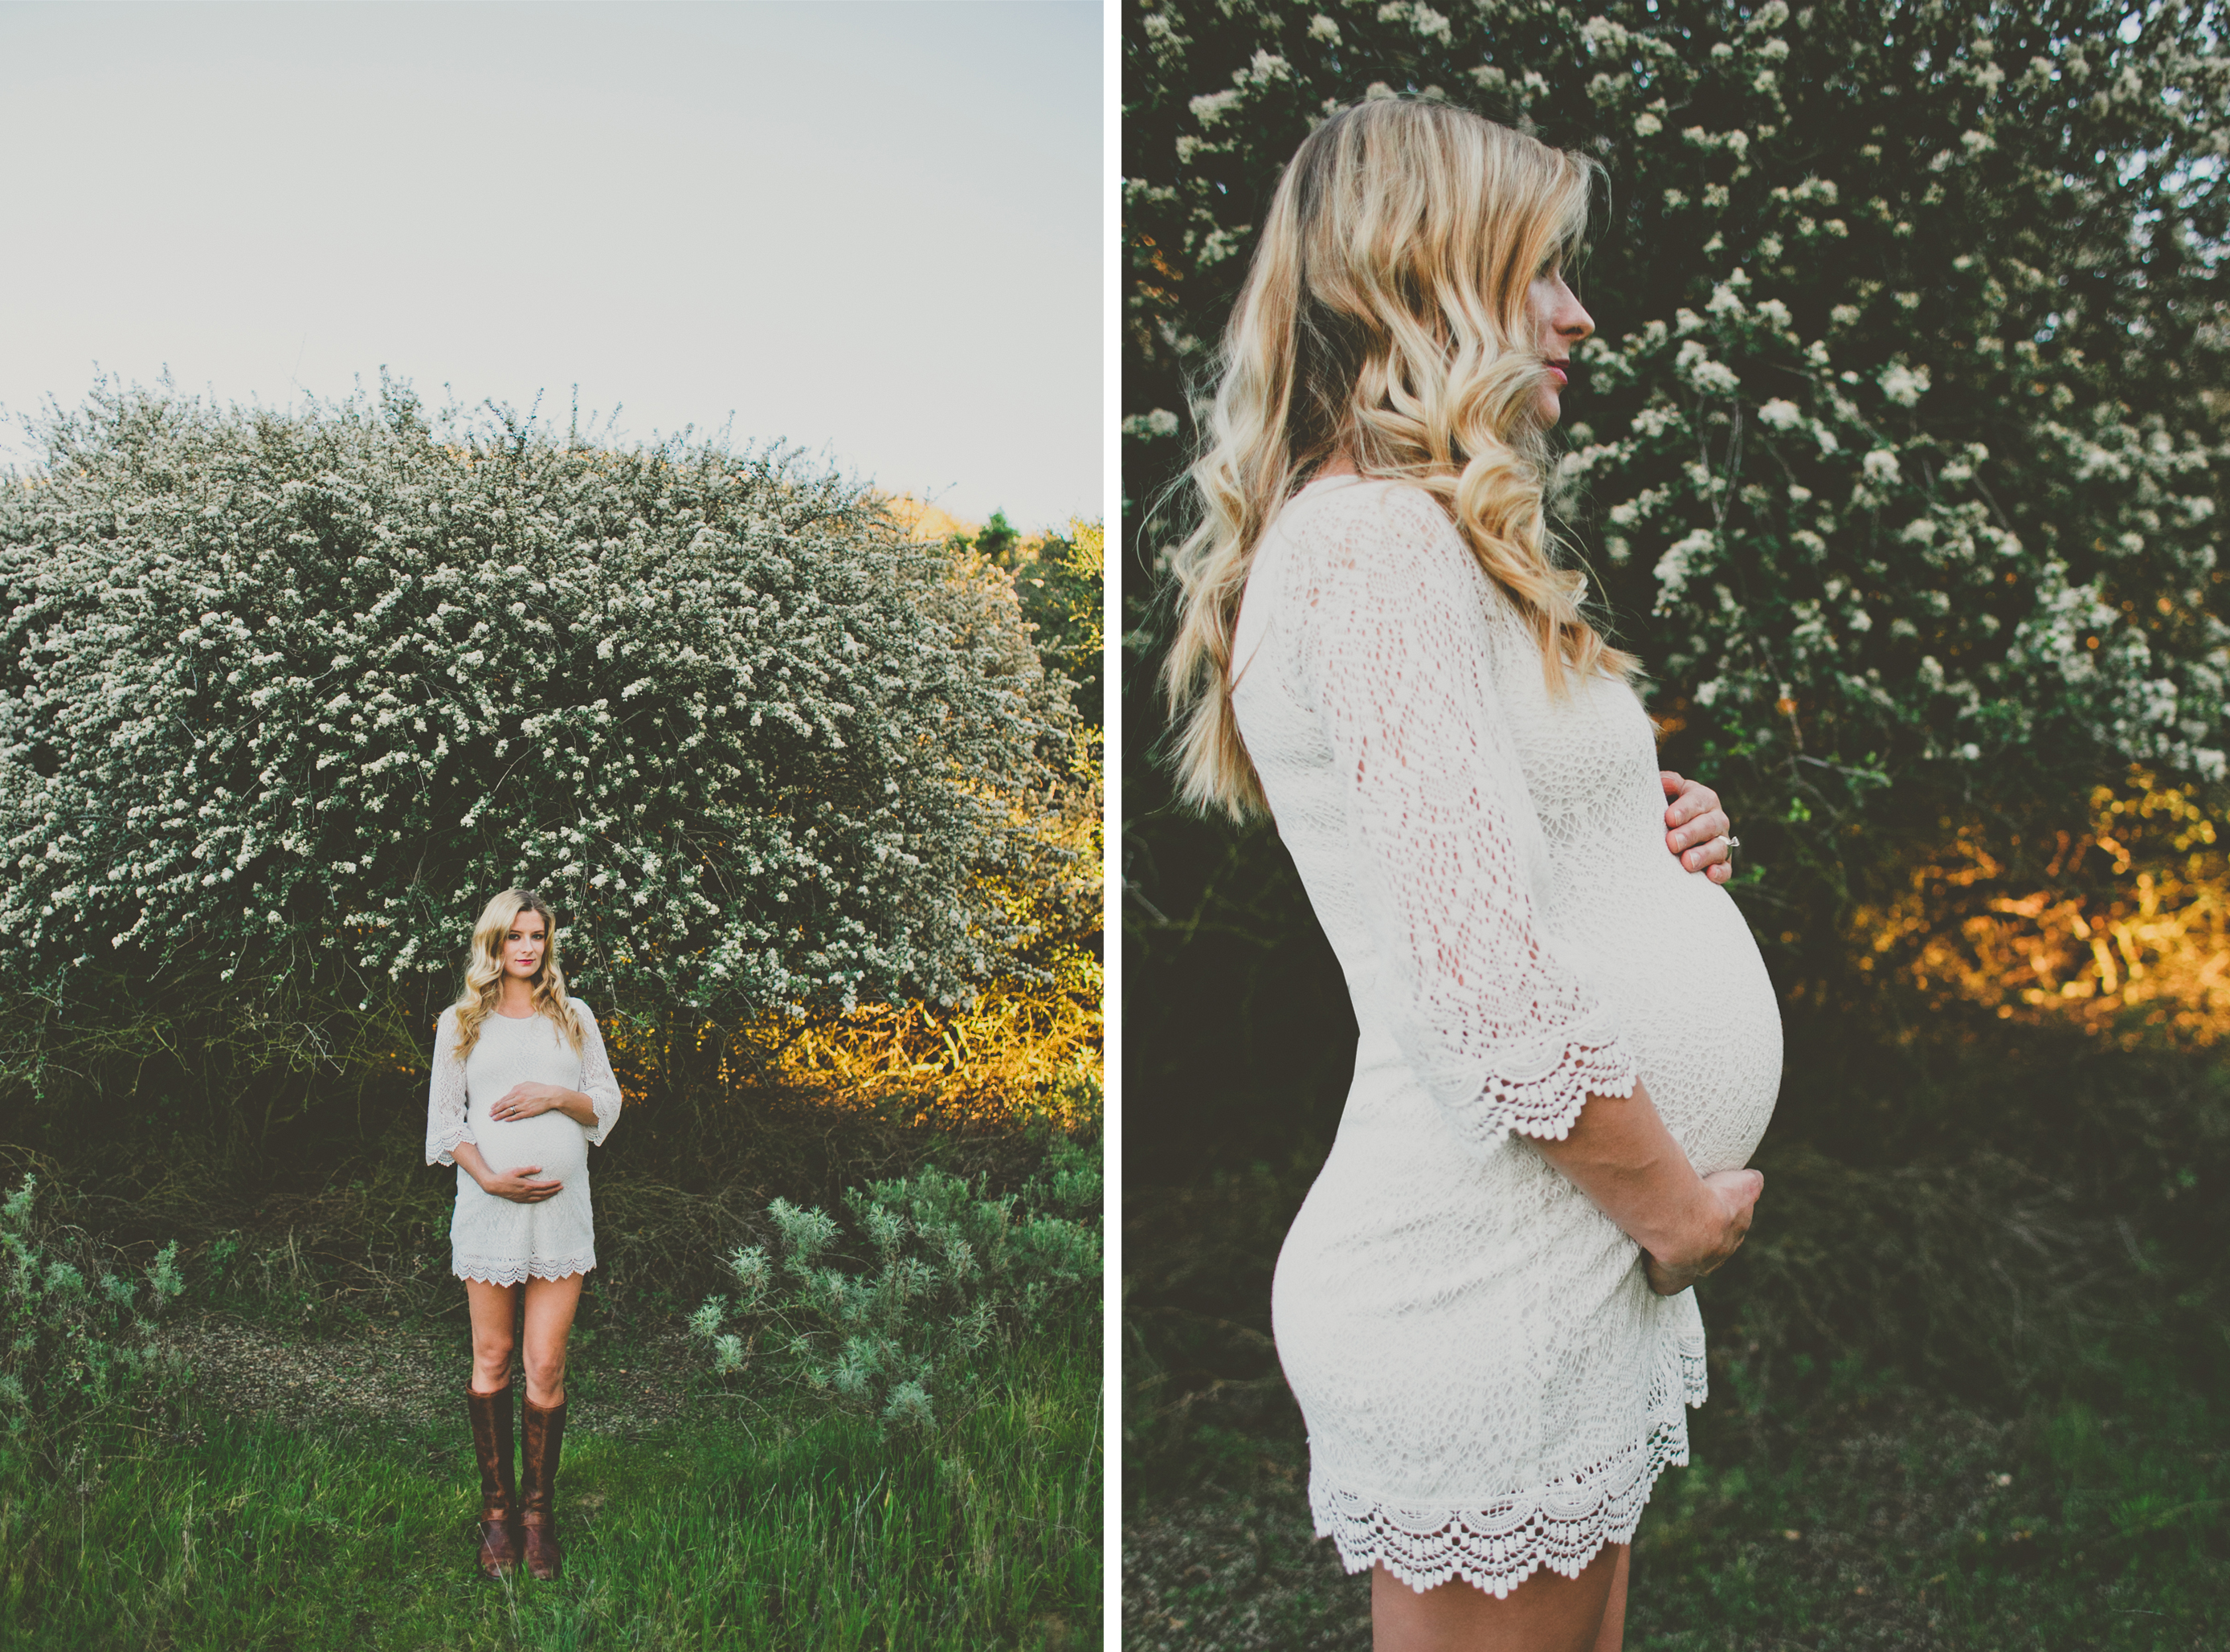 Outdoor Maternity Photography